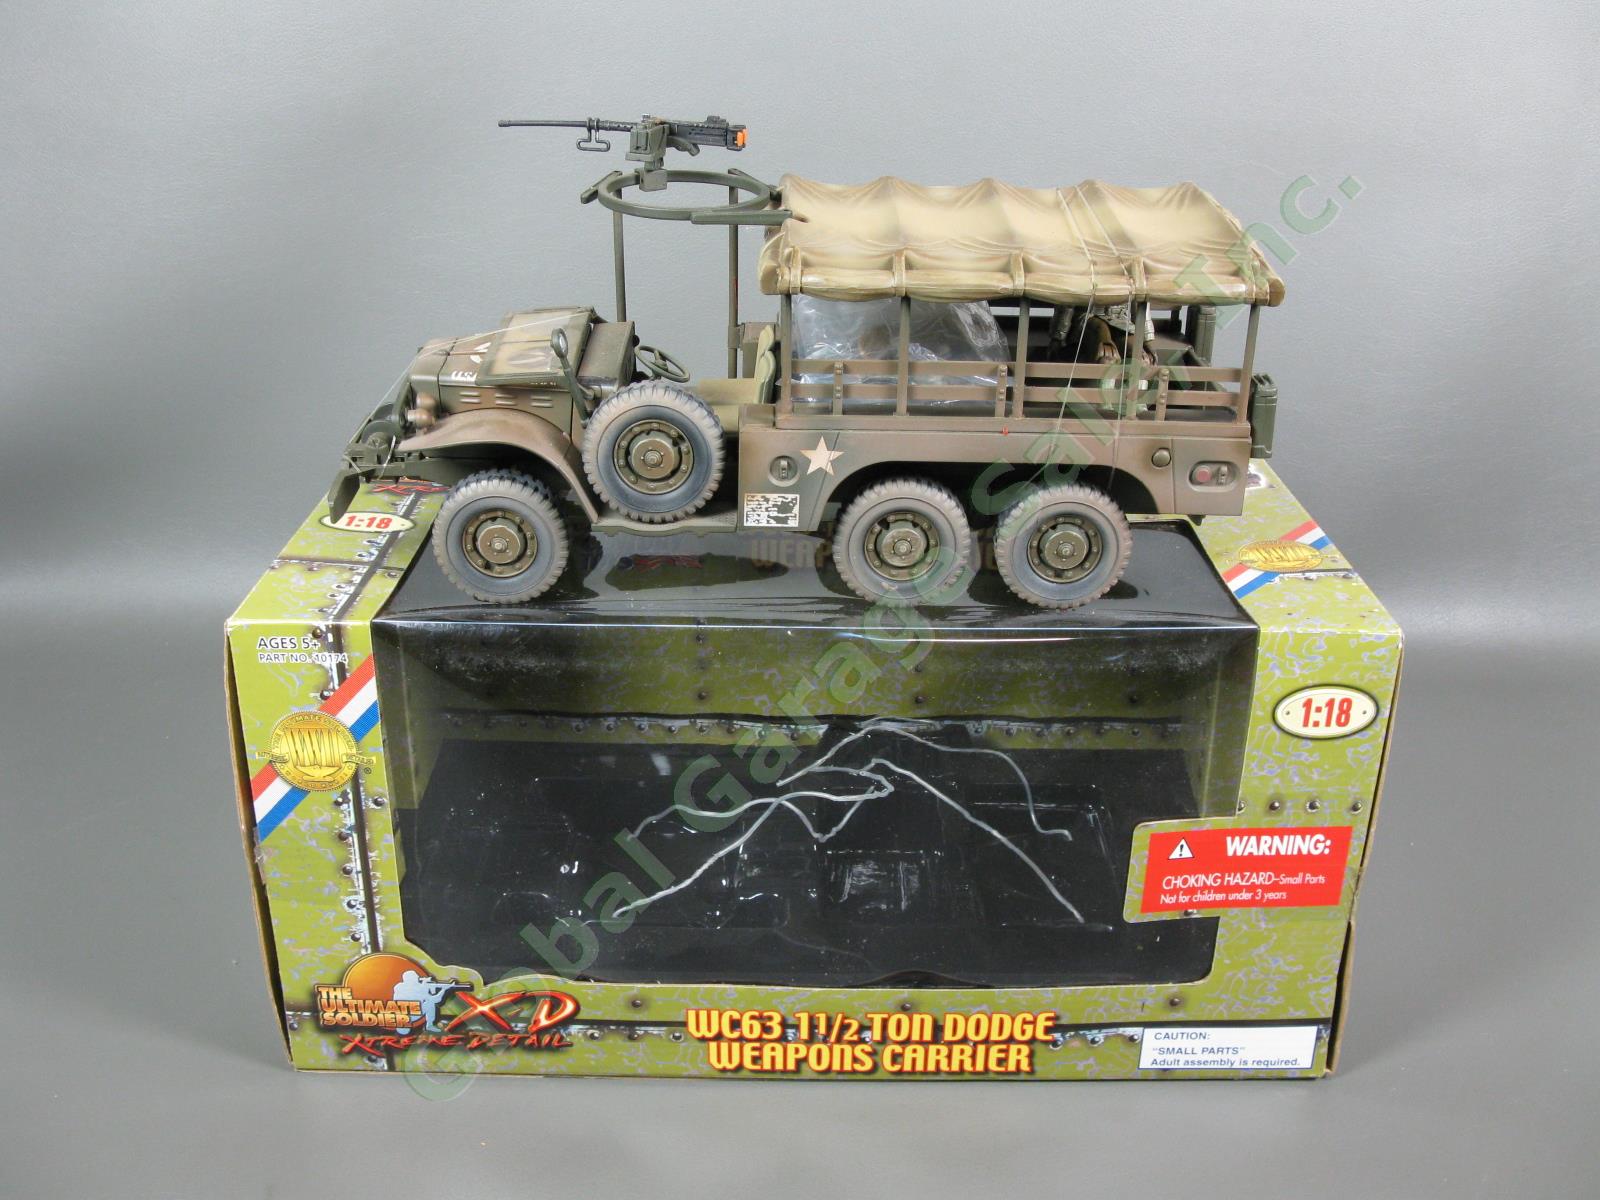 Ultimate Soldier 1/18 WWII US WC63 1-1/2 Ton Dodge Weapons Carrier 21st Century